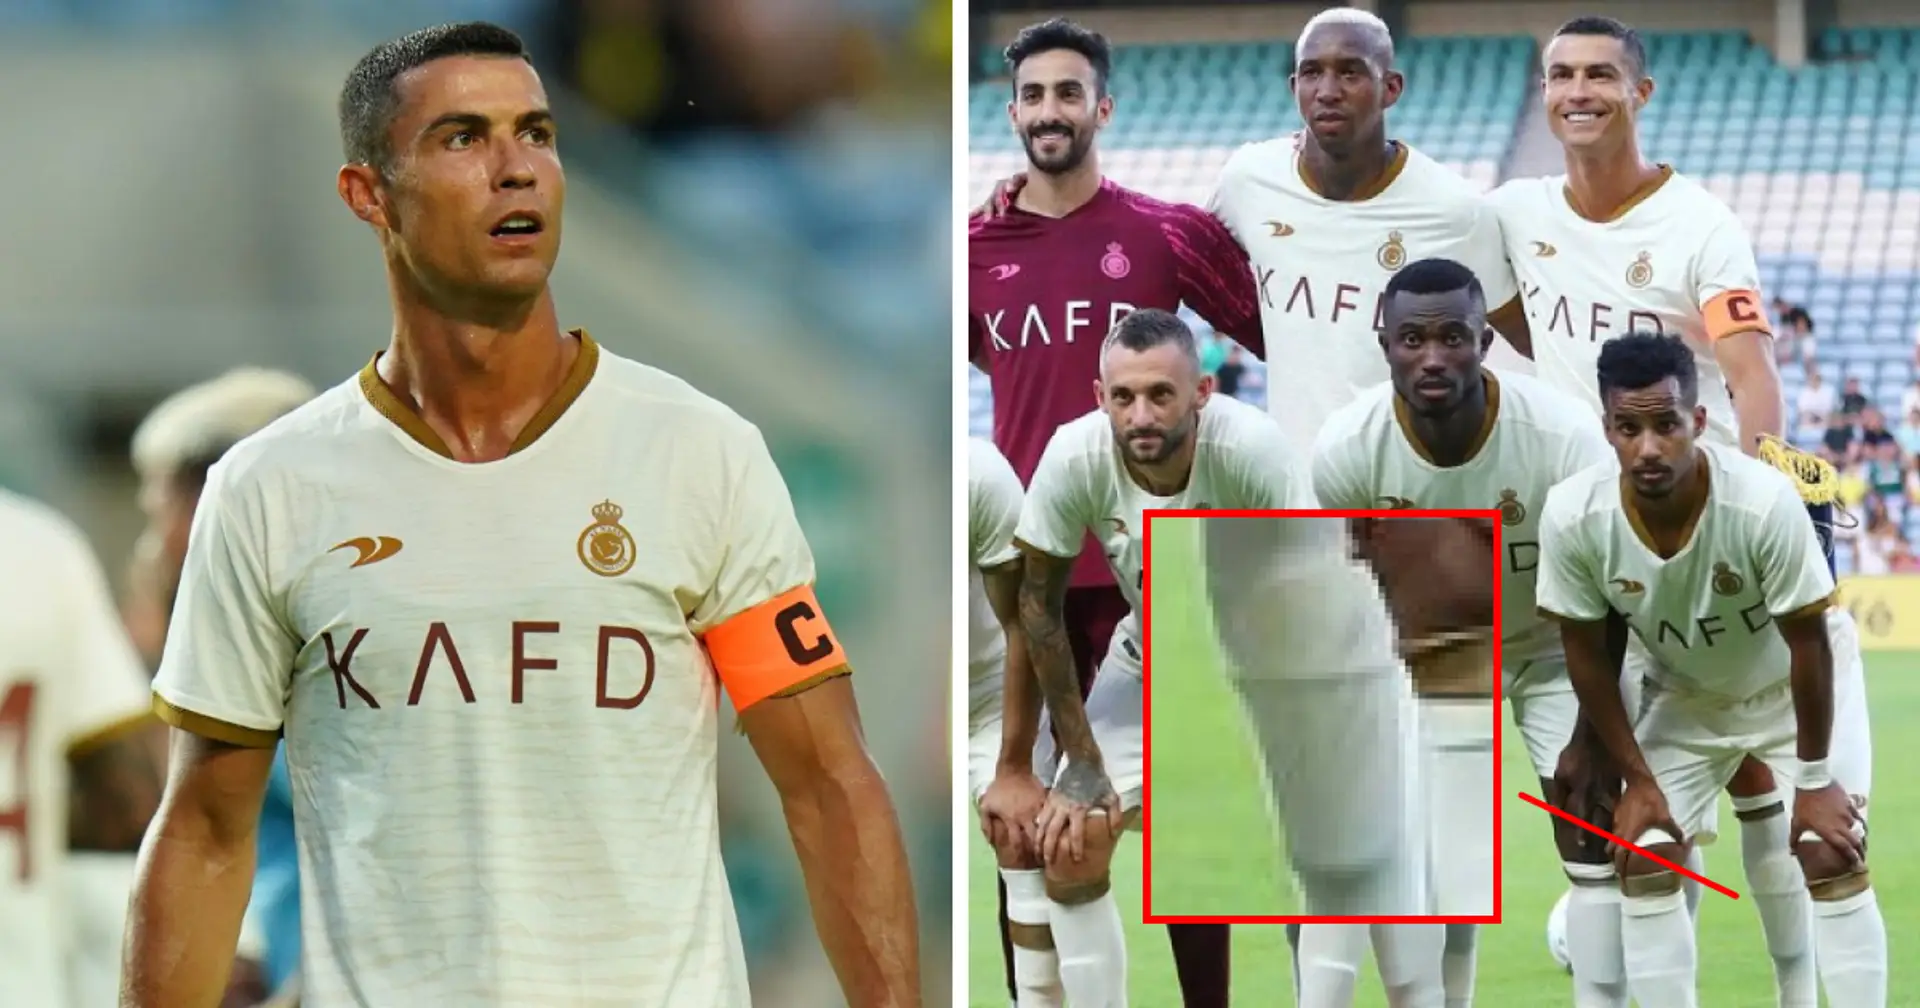 Cristiano Ronaldo violated contract by wearing Adidas in Al Nassr match